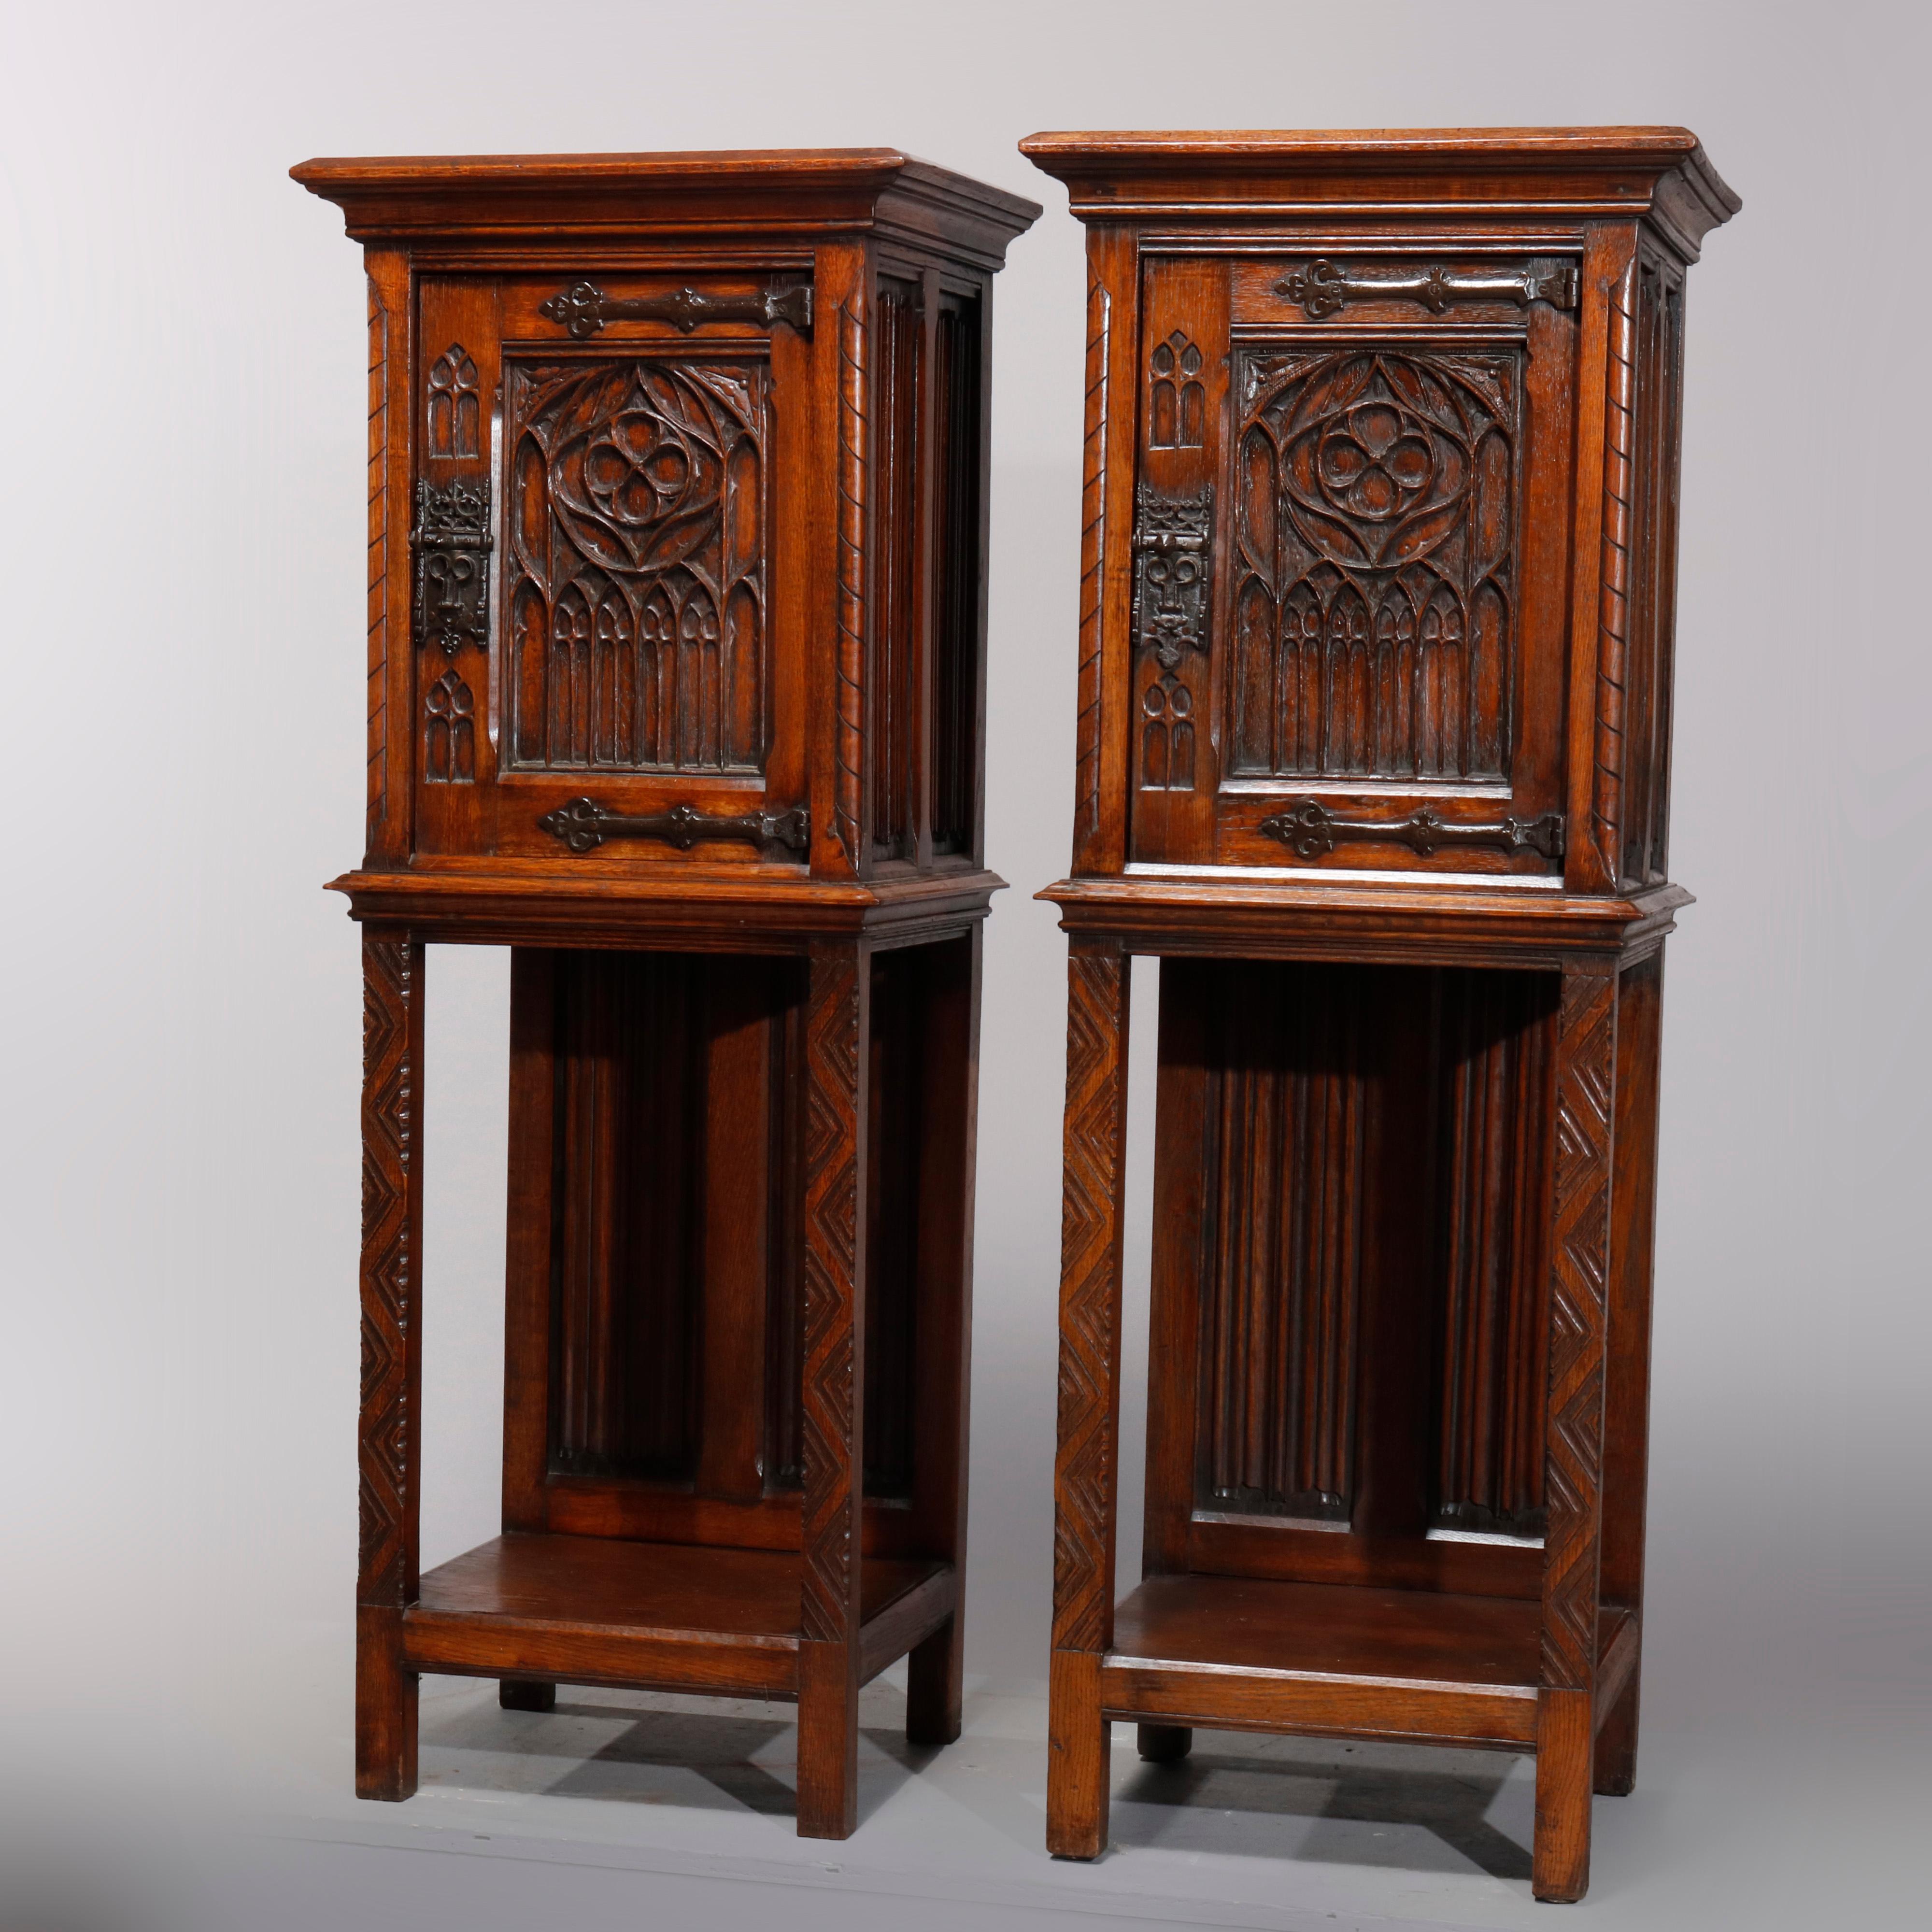 19th Century Antique Pair of English Gothic Revival Carved Oak Side Cabinets, circa 1890